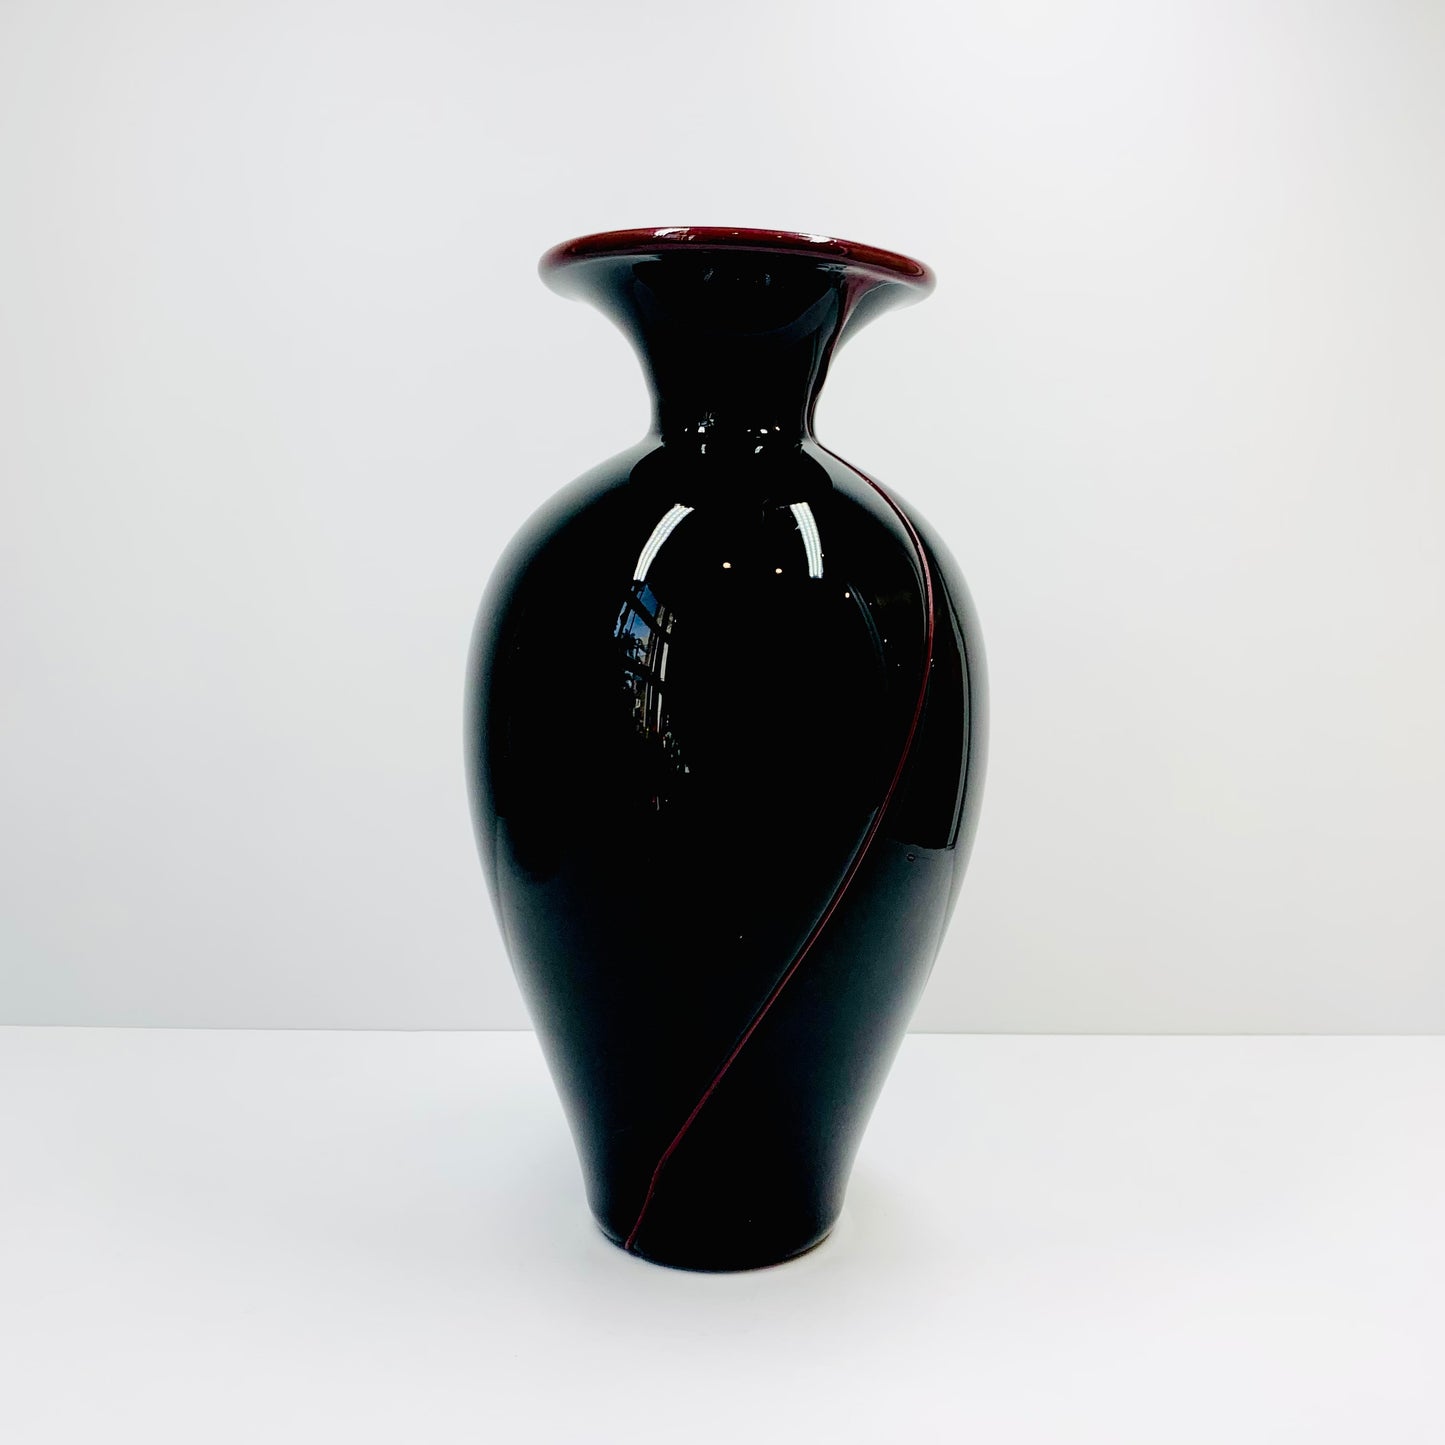 Vintage Taiwanese black glass vase with burgundy trimming across